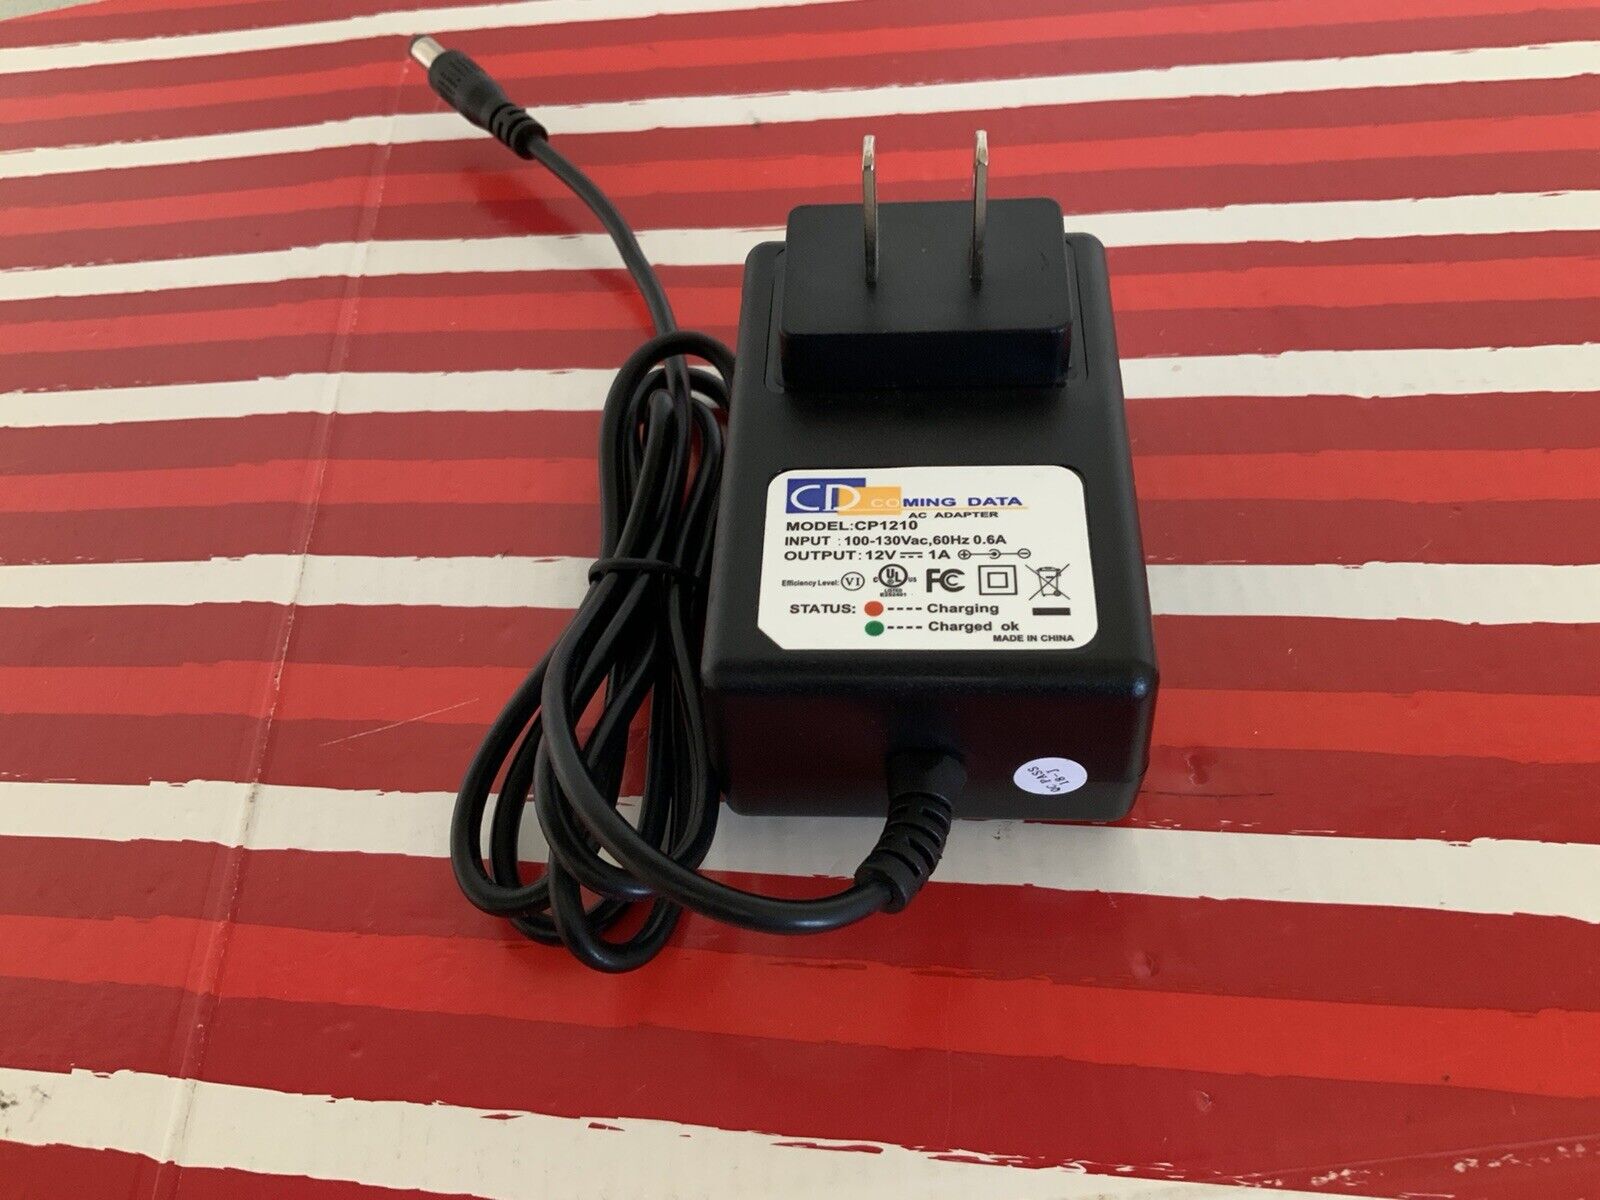 CD-Coming Data Ac Adapter Model-CP1210 Output-12V-1A Brand Coming Data Type Adapter Connection Split/Duplication 1:2 O